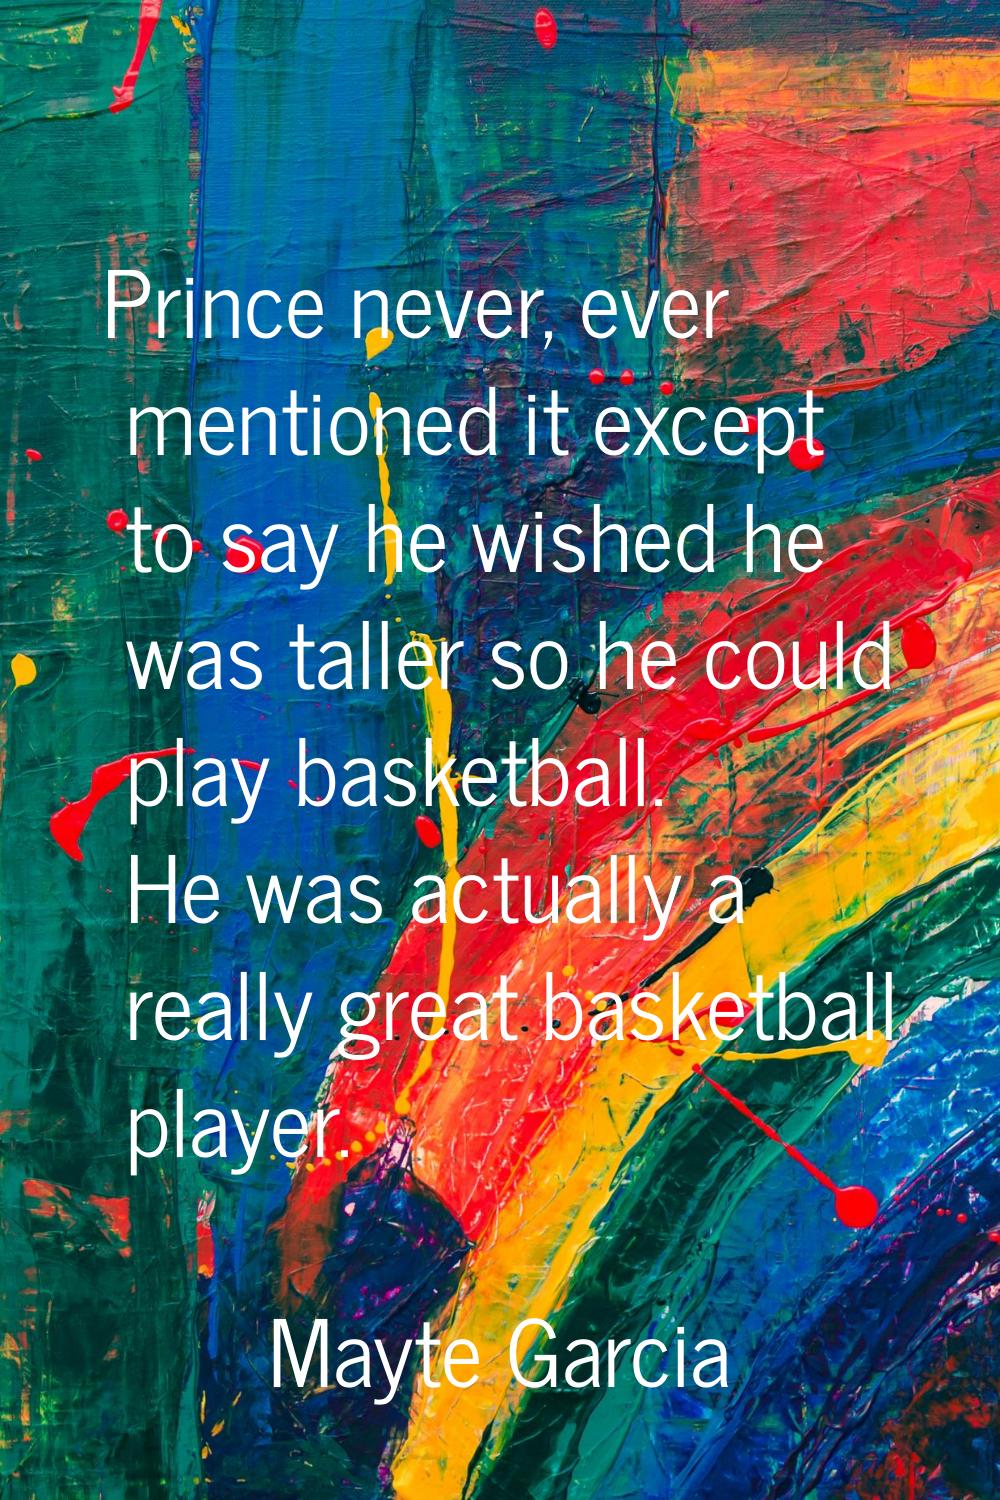 Prince never, ever mentioned it except to say he wished he was taller so he could play basketball. 